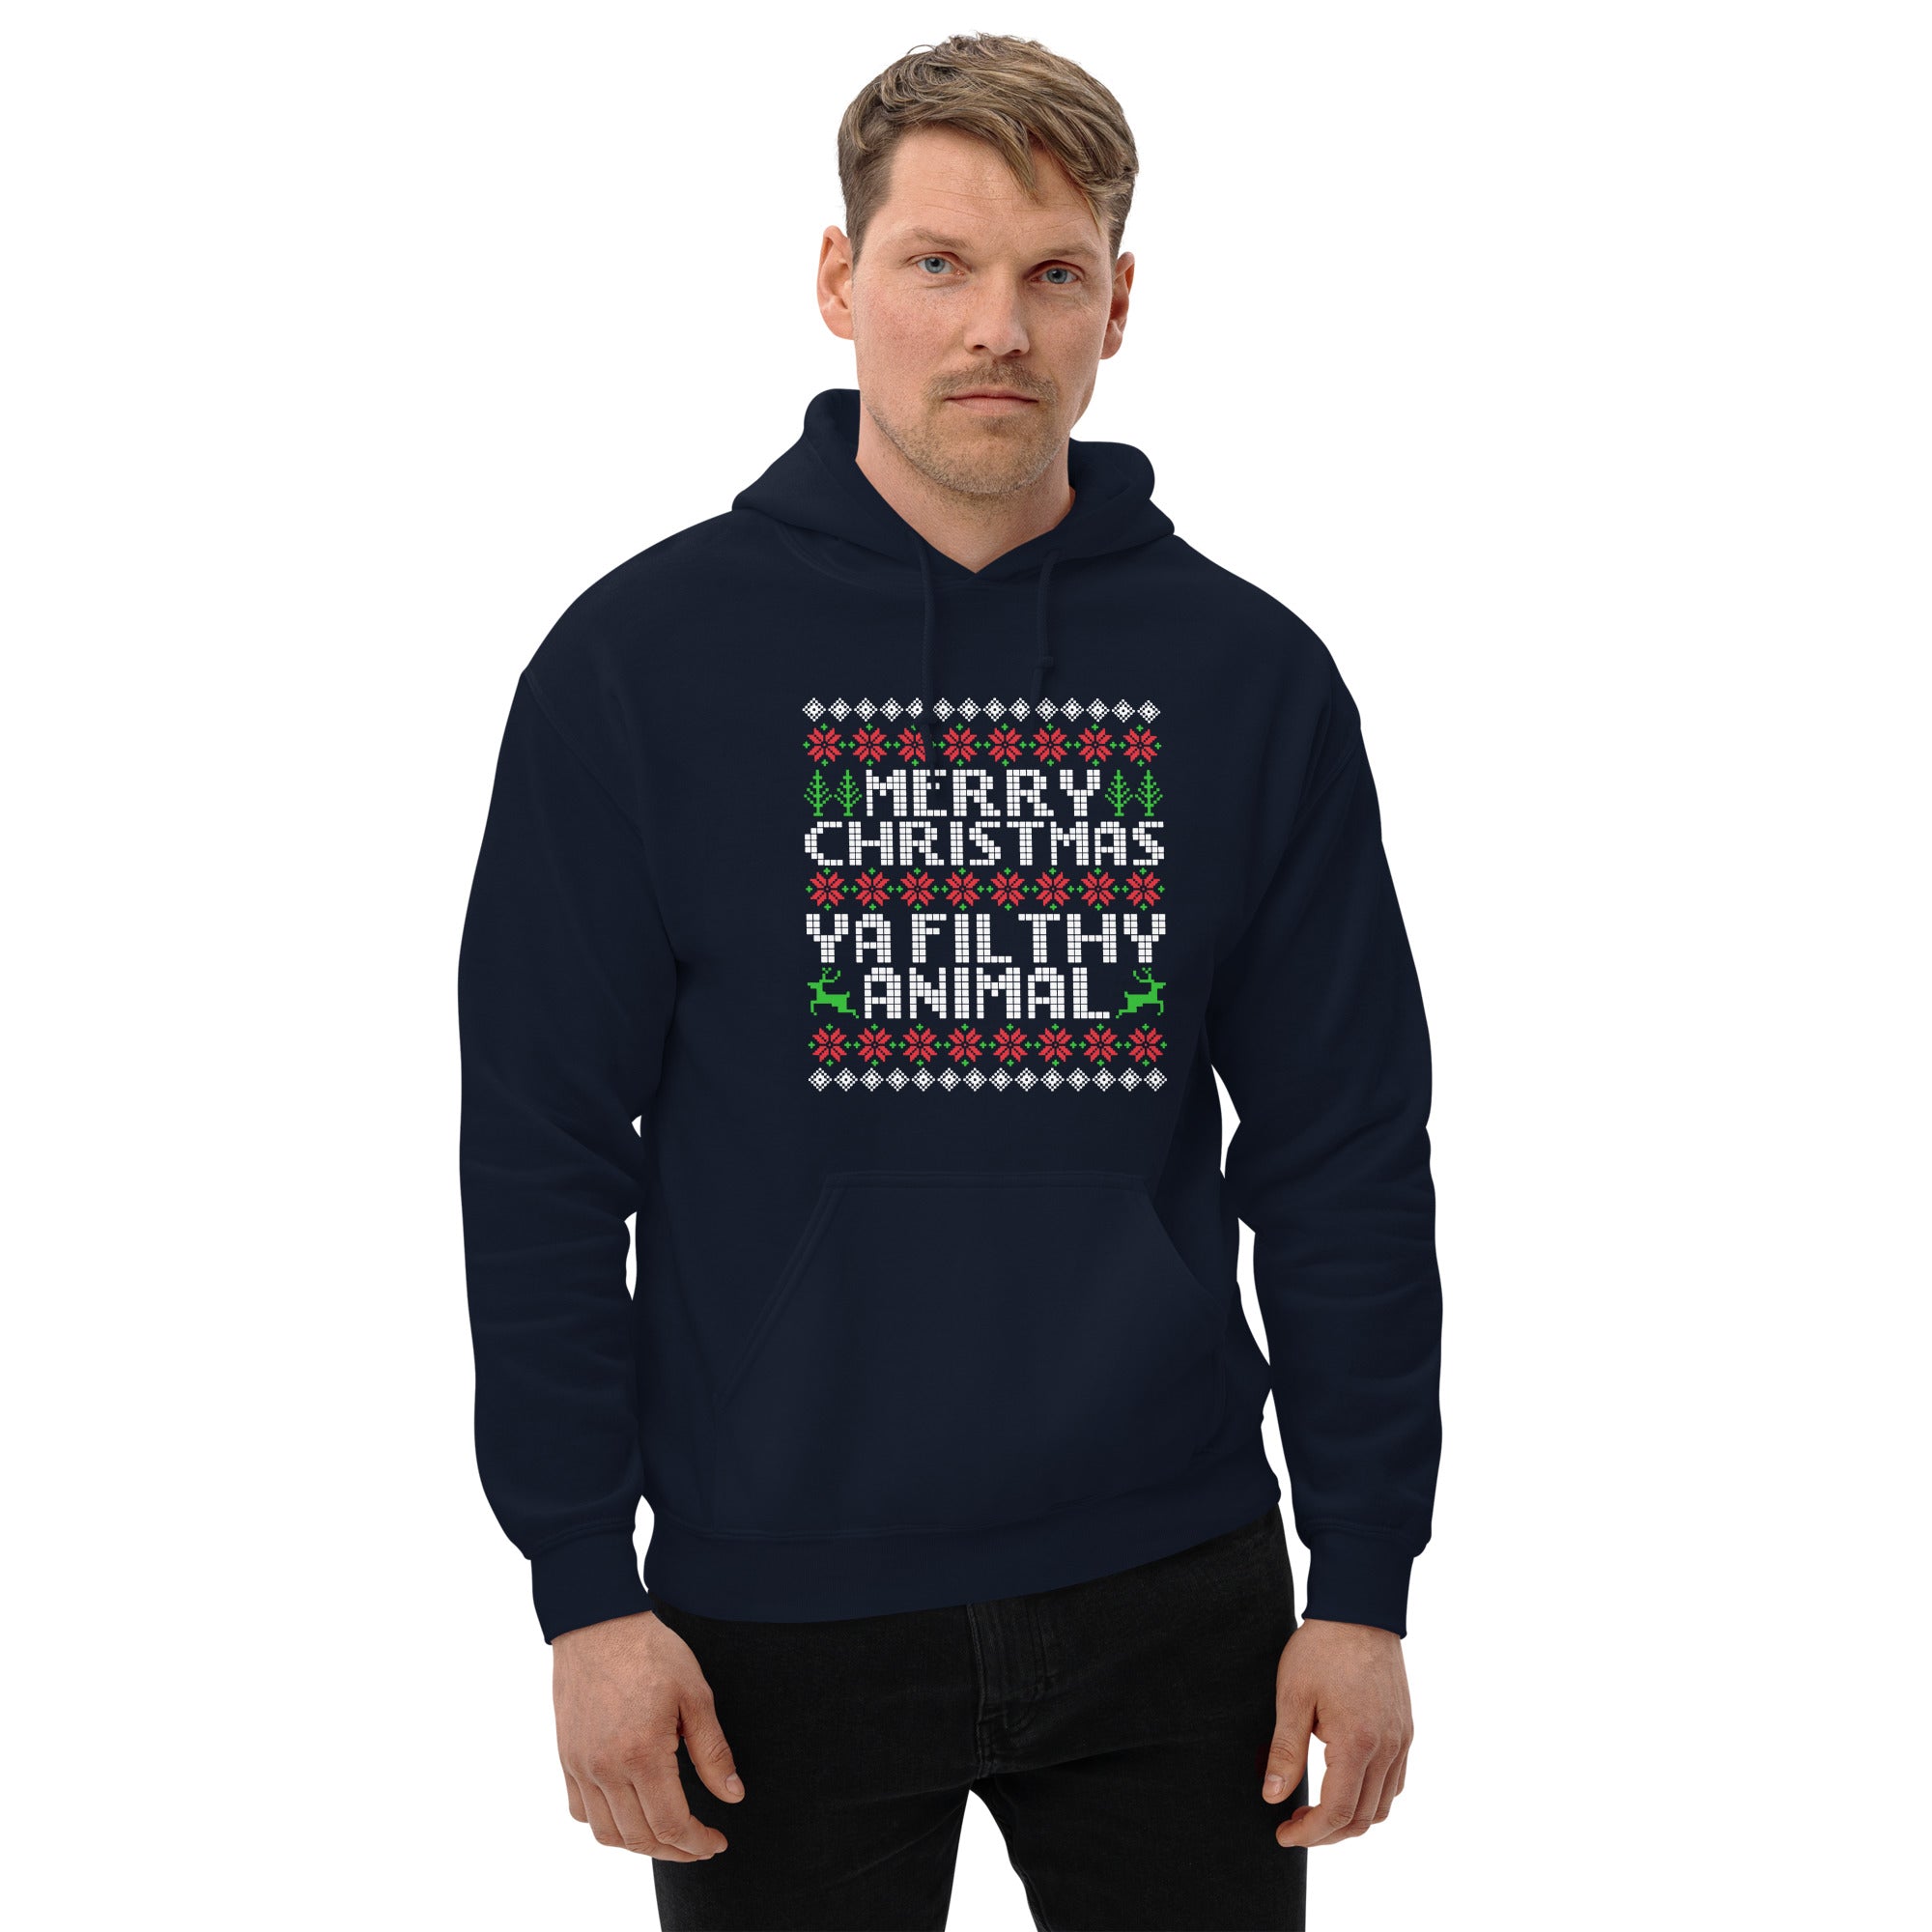 Merry Christmas Ya Filthy Animal Ugly Xmas Home Alone Funny Saying Quote Men's Hoodie